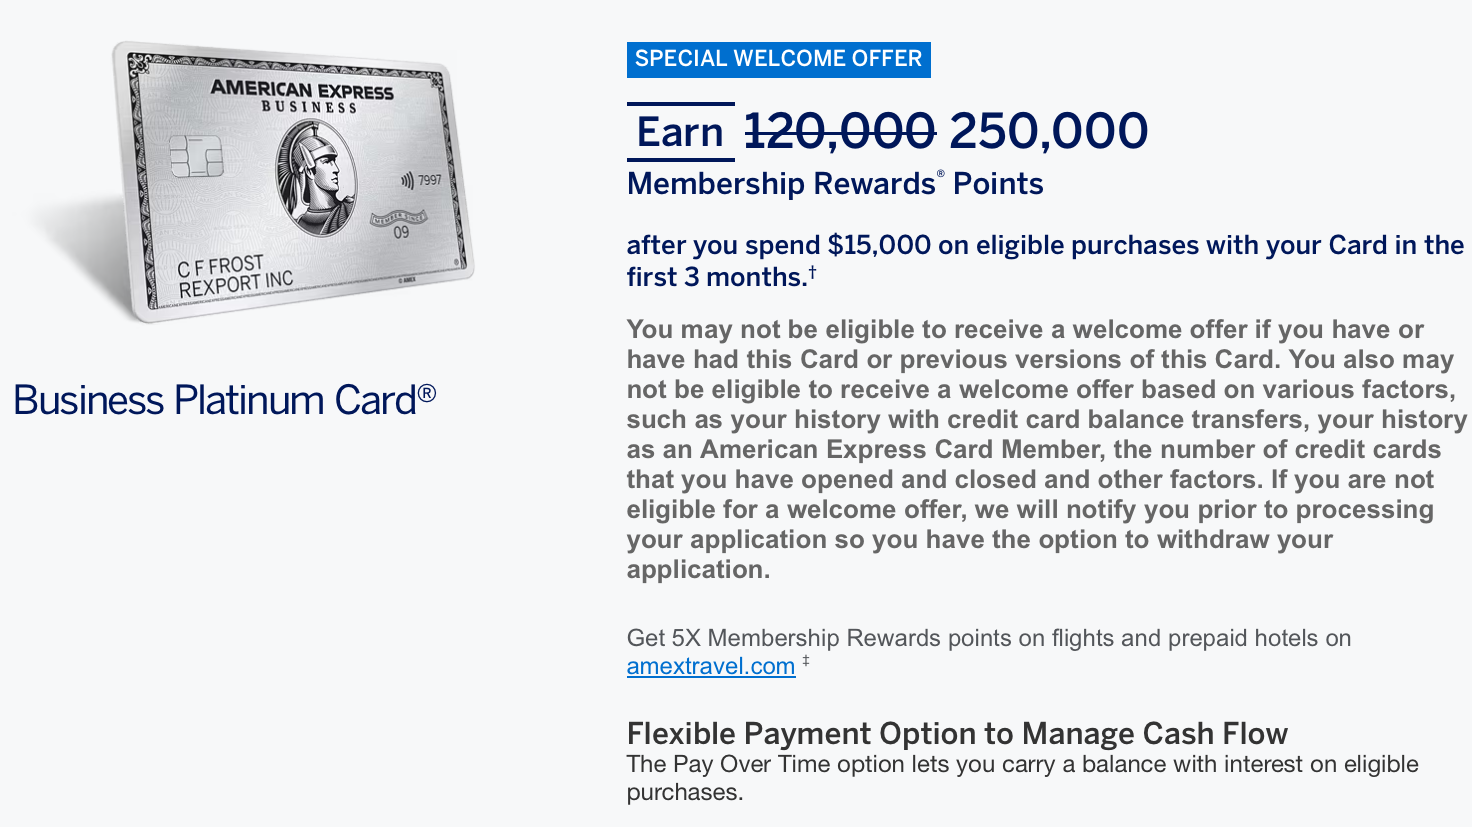 Amex Business Platinum Offering Up to 250K Bonus, Plus How to Find It